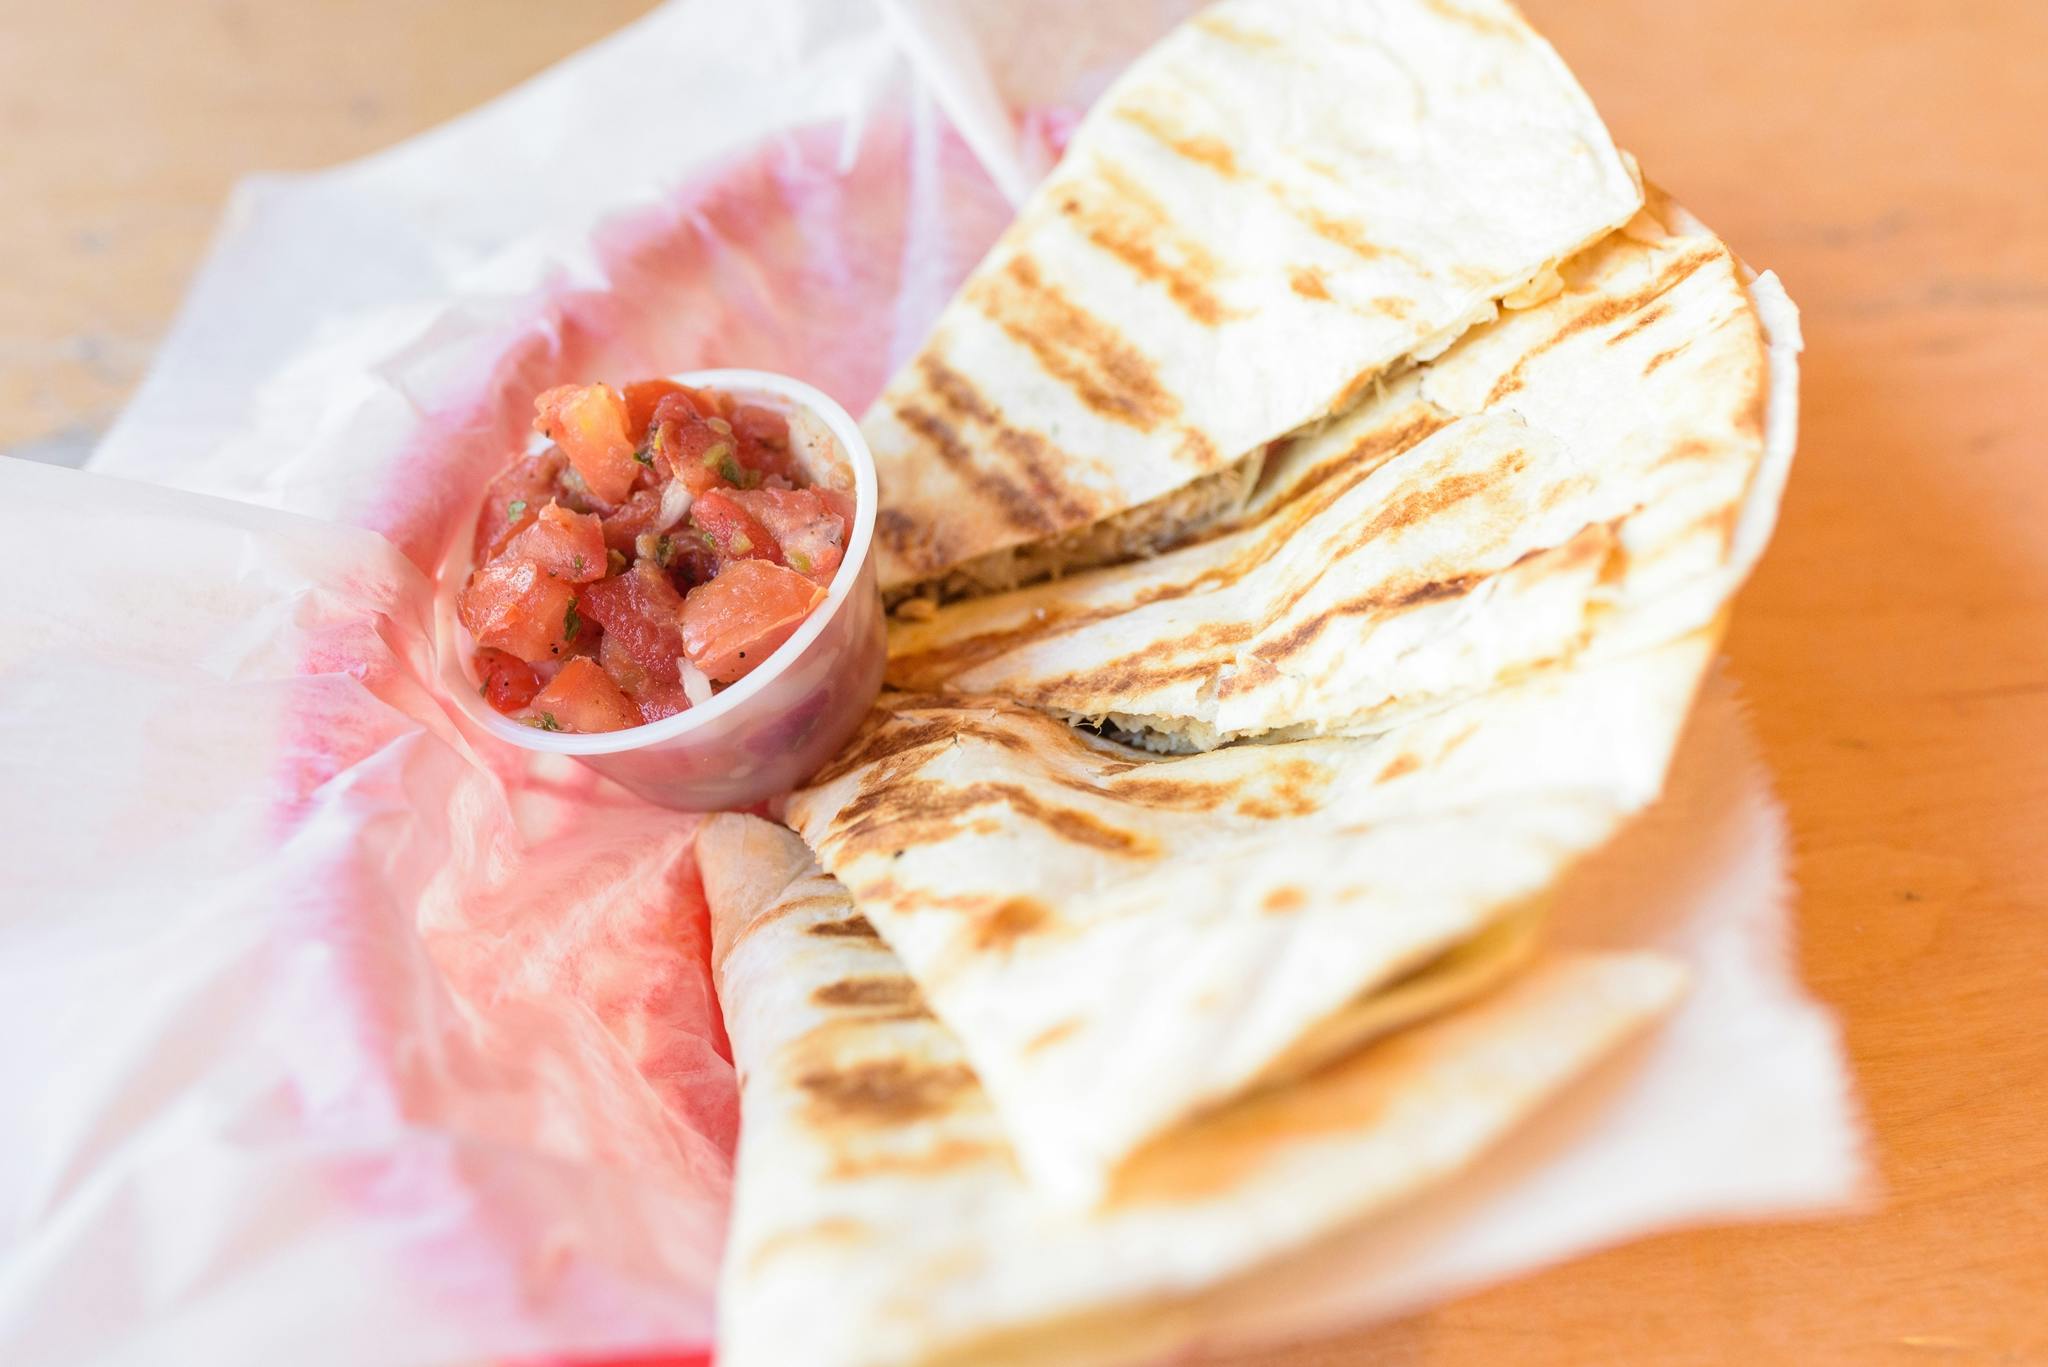 Grilled Chicken Quesadilla from BTB Burrito/ Good Time Charley's in Ann Arbor, MI